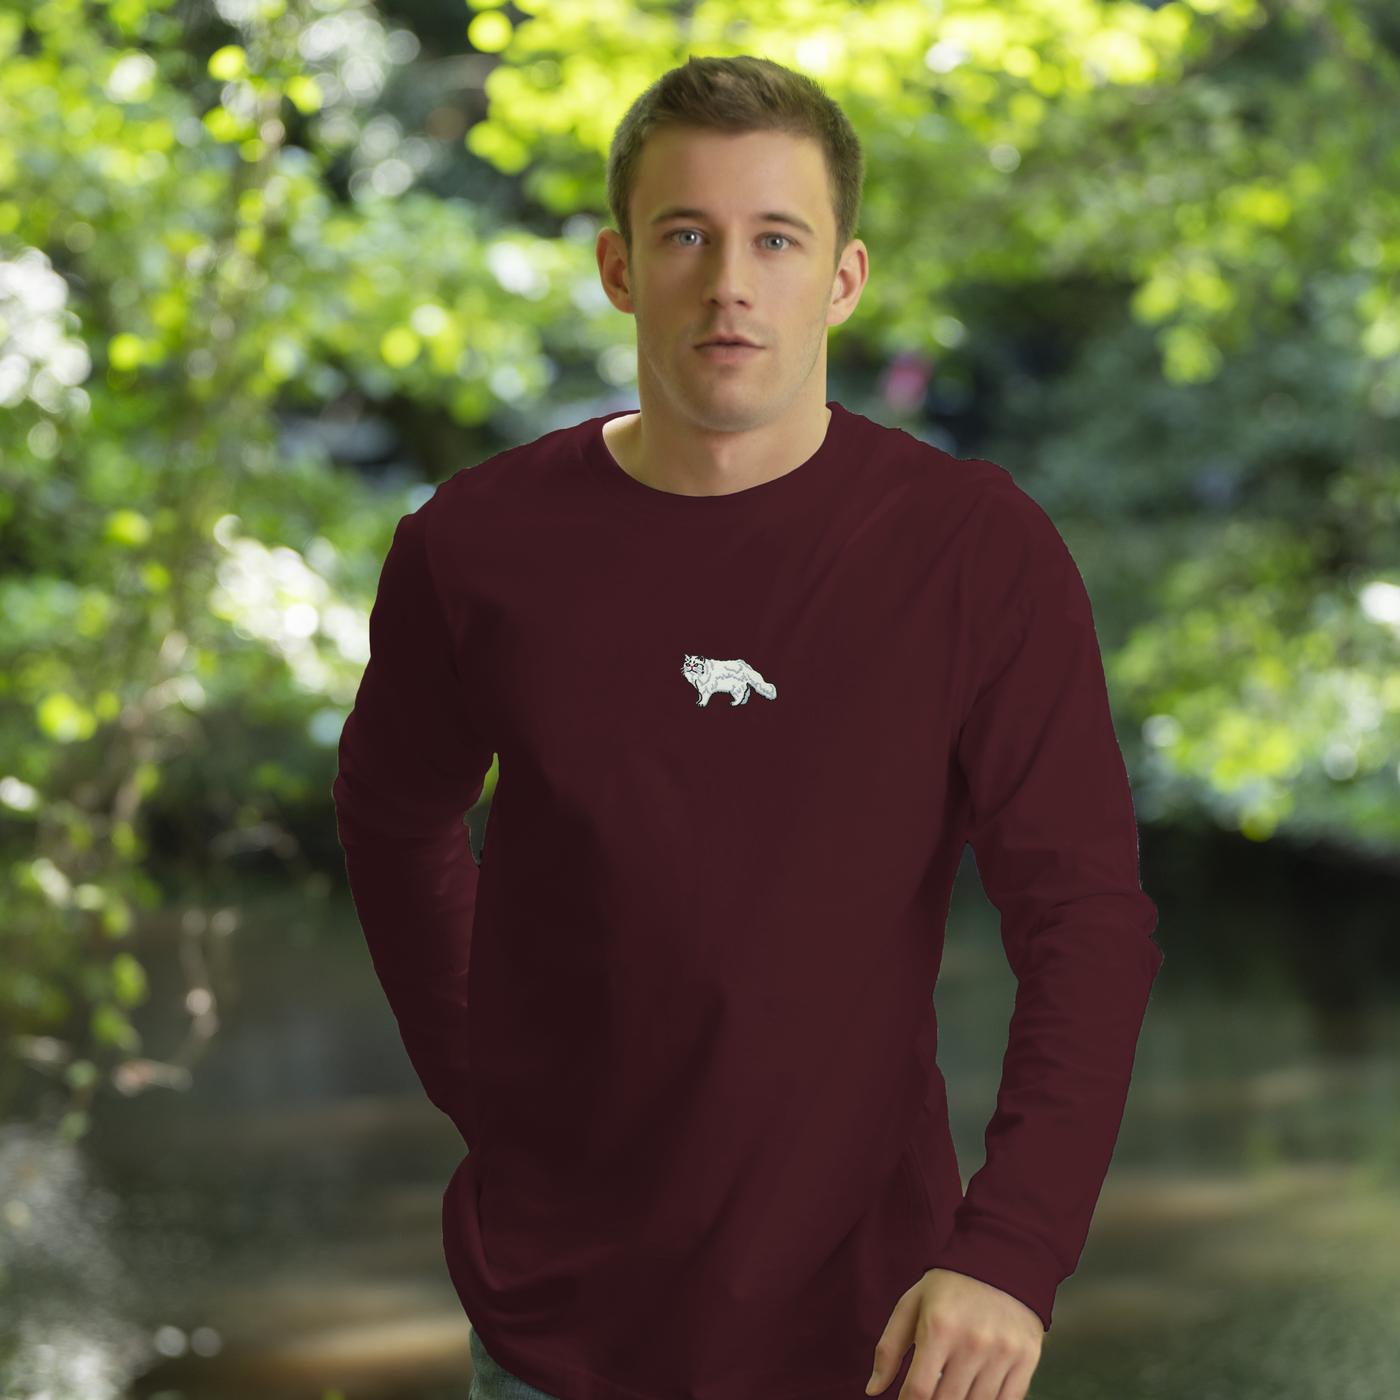 Bobby's Planet Men's Embroidered Persian Long Sleeve Shirt from Paws Dog Cat Animals Collection in Maroon Color#color_maroon